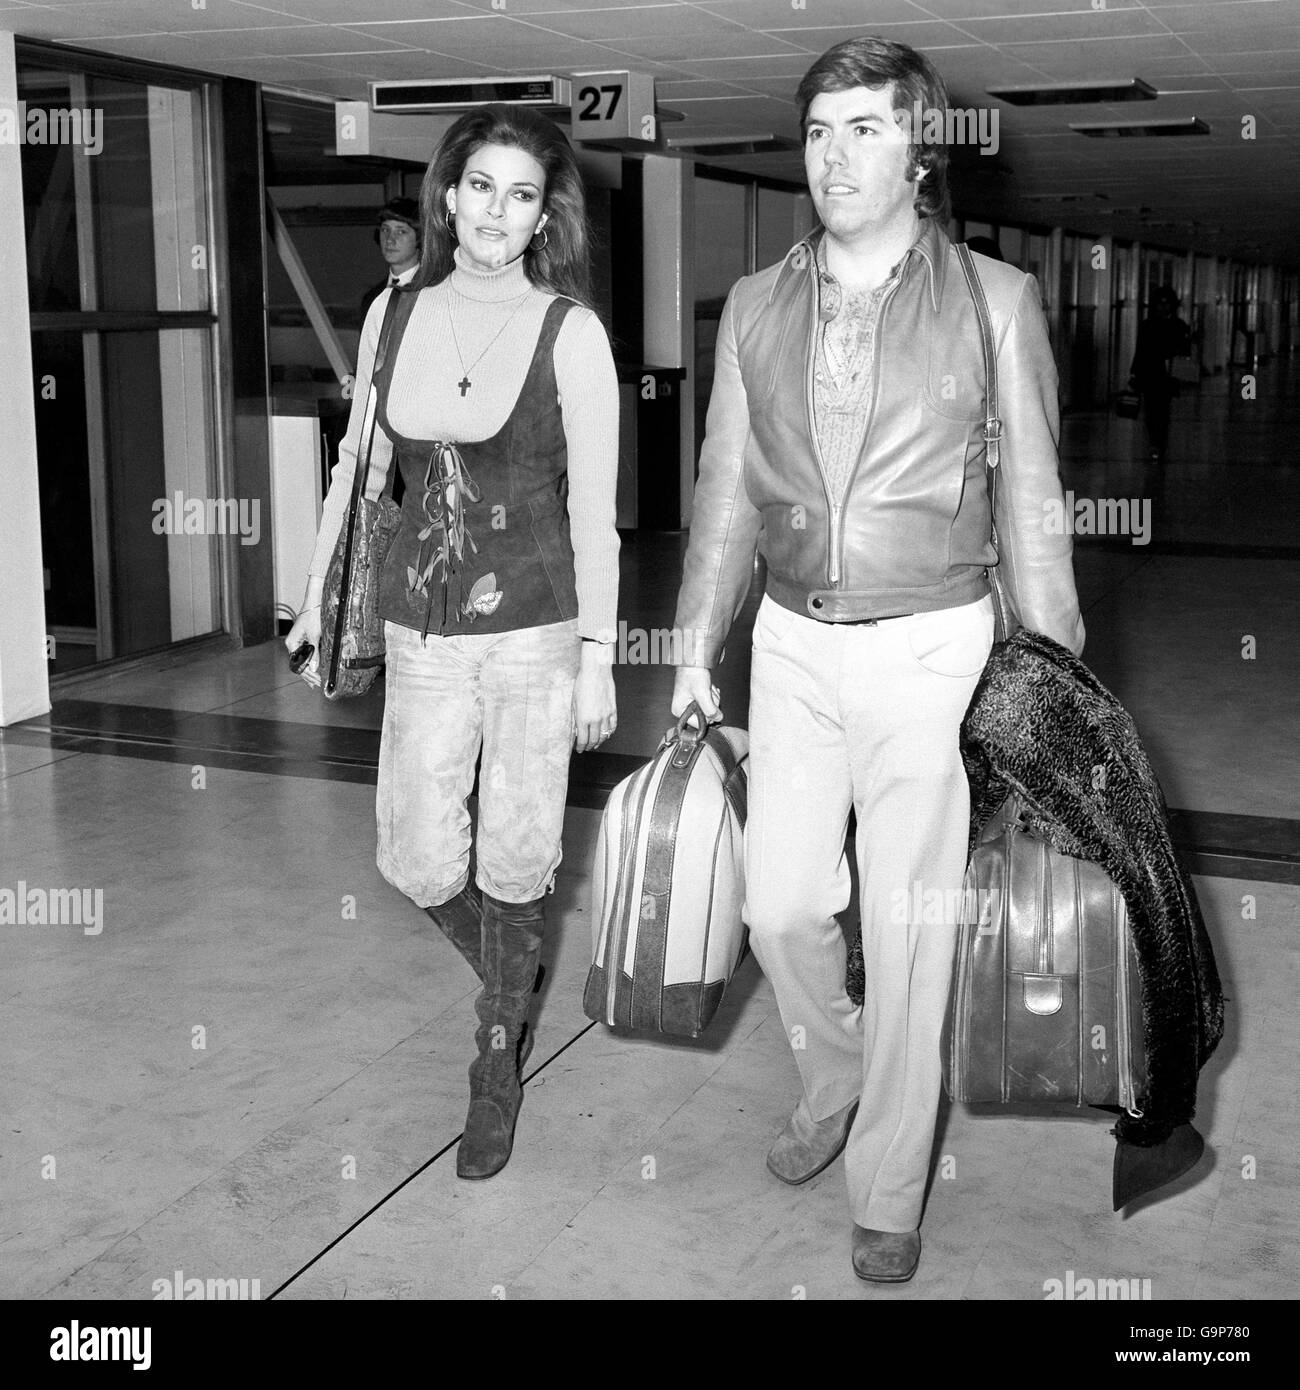 Raquel Welch arrives in London Stock Photo